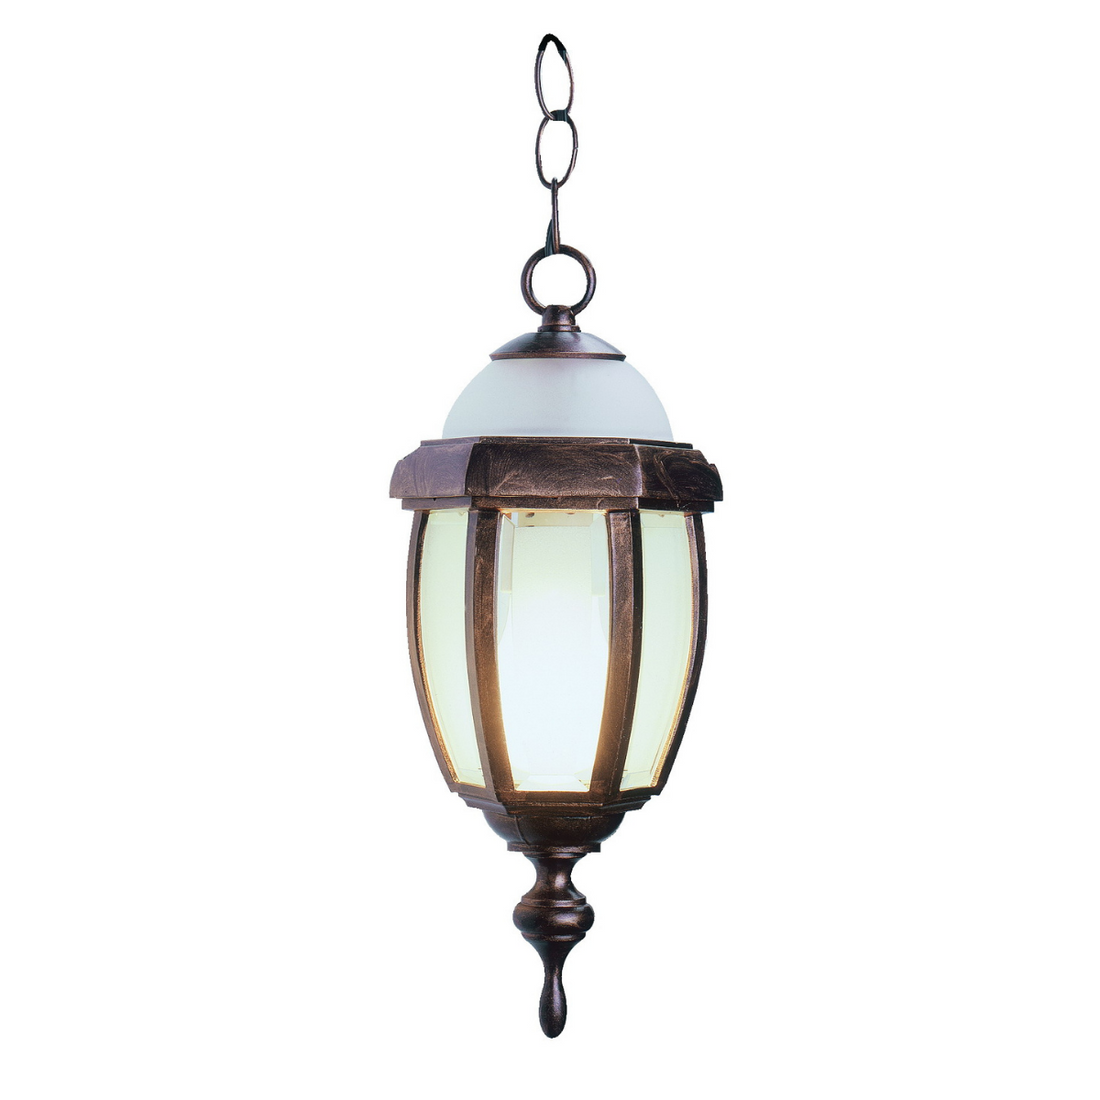 Novella III - Ceiling mounting with chain open bottom large format - 86039